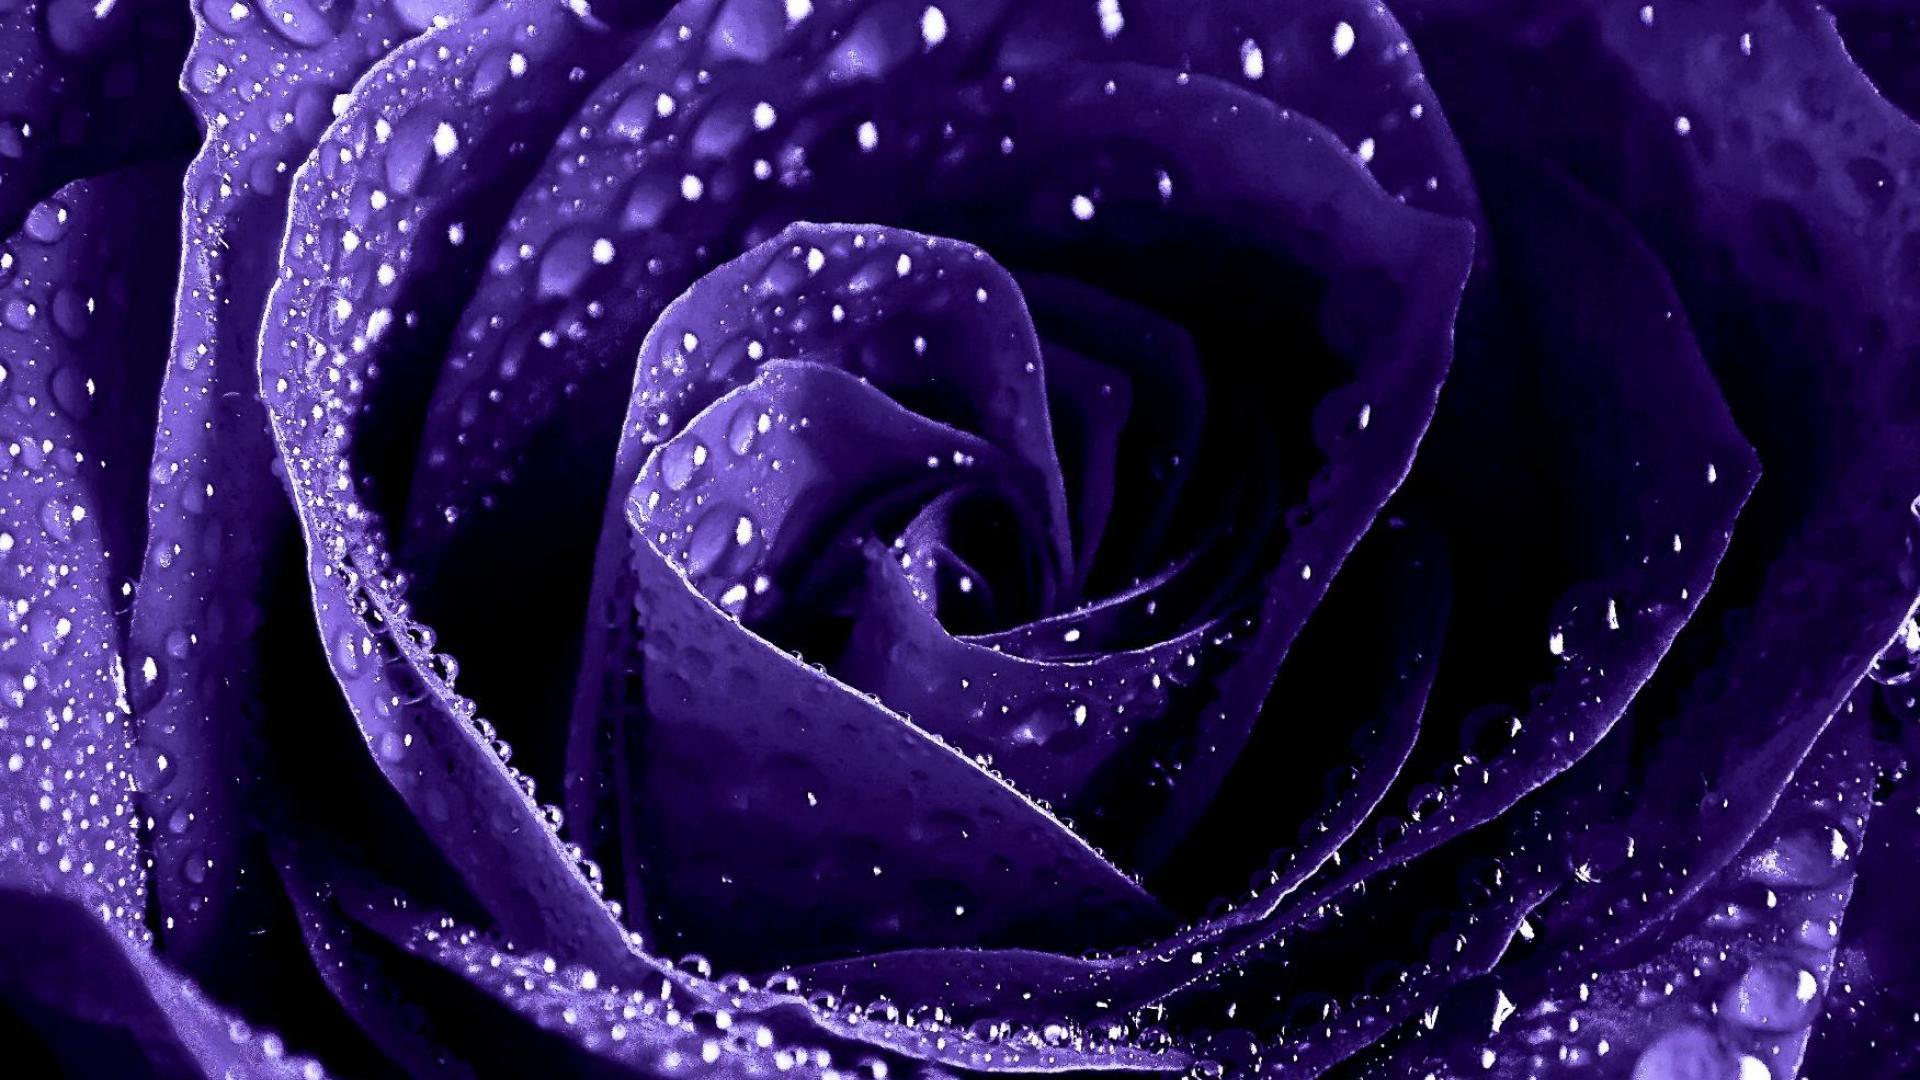 Purple Roses Wallpapers   Wallpaper High Definition High Quality 1920x1080